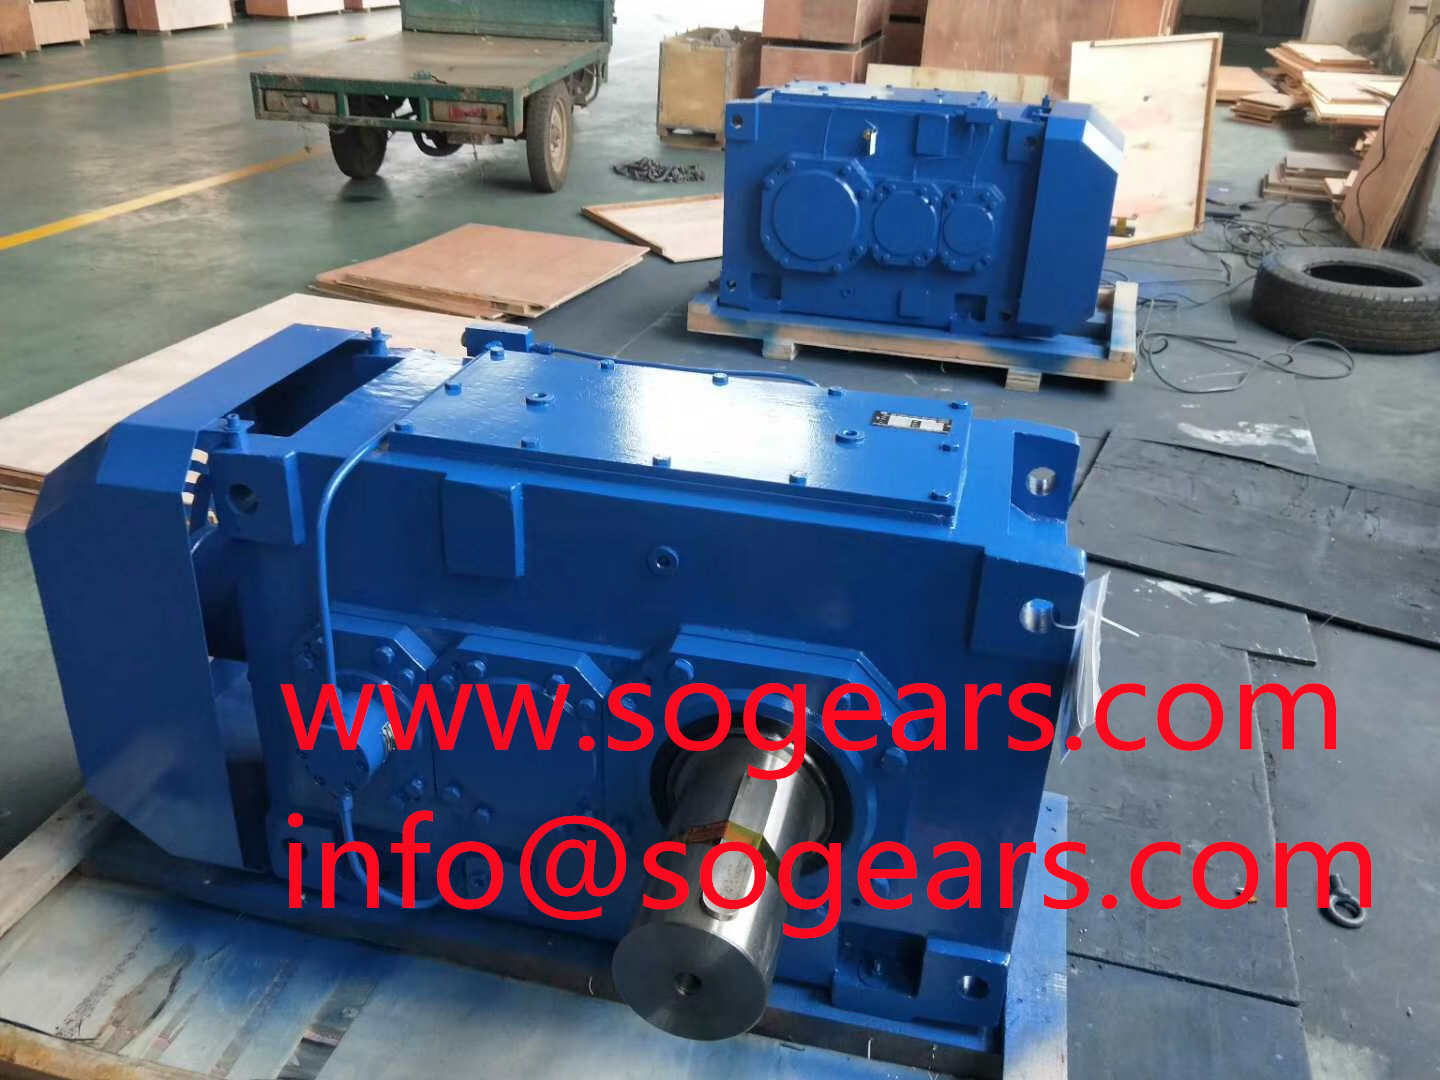 S-series gear reducer sample - helical worm